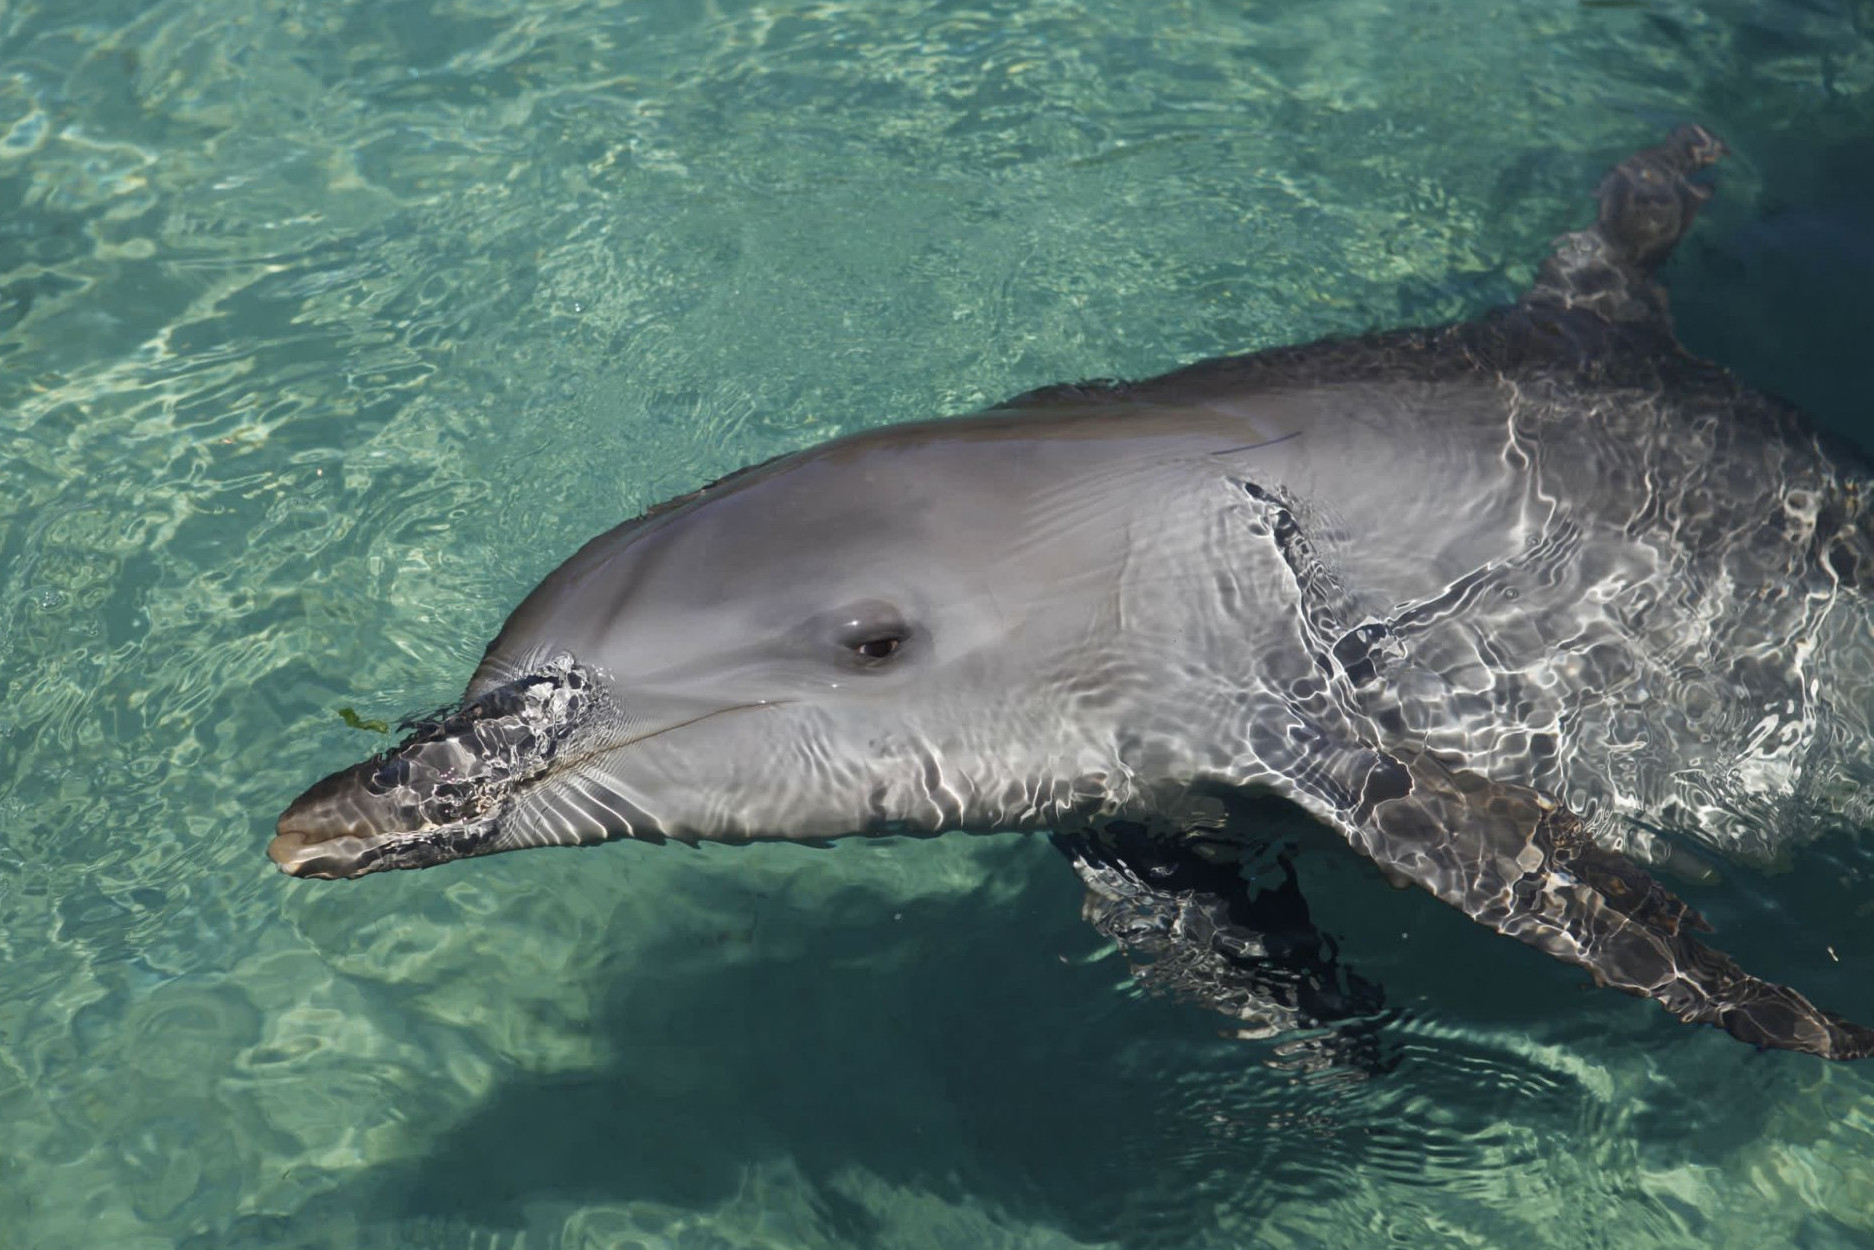 Dolphin in captivity at entertainment venue - World Animal Protection - Wildlife. Not entertainers